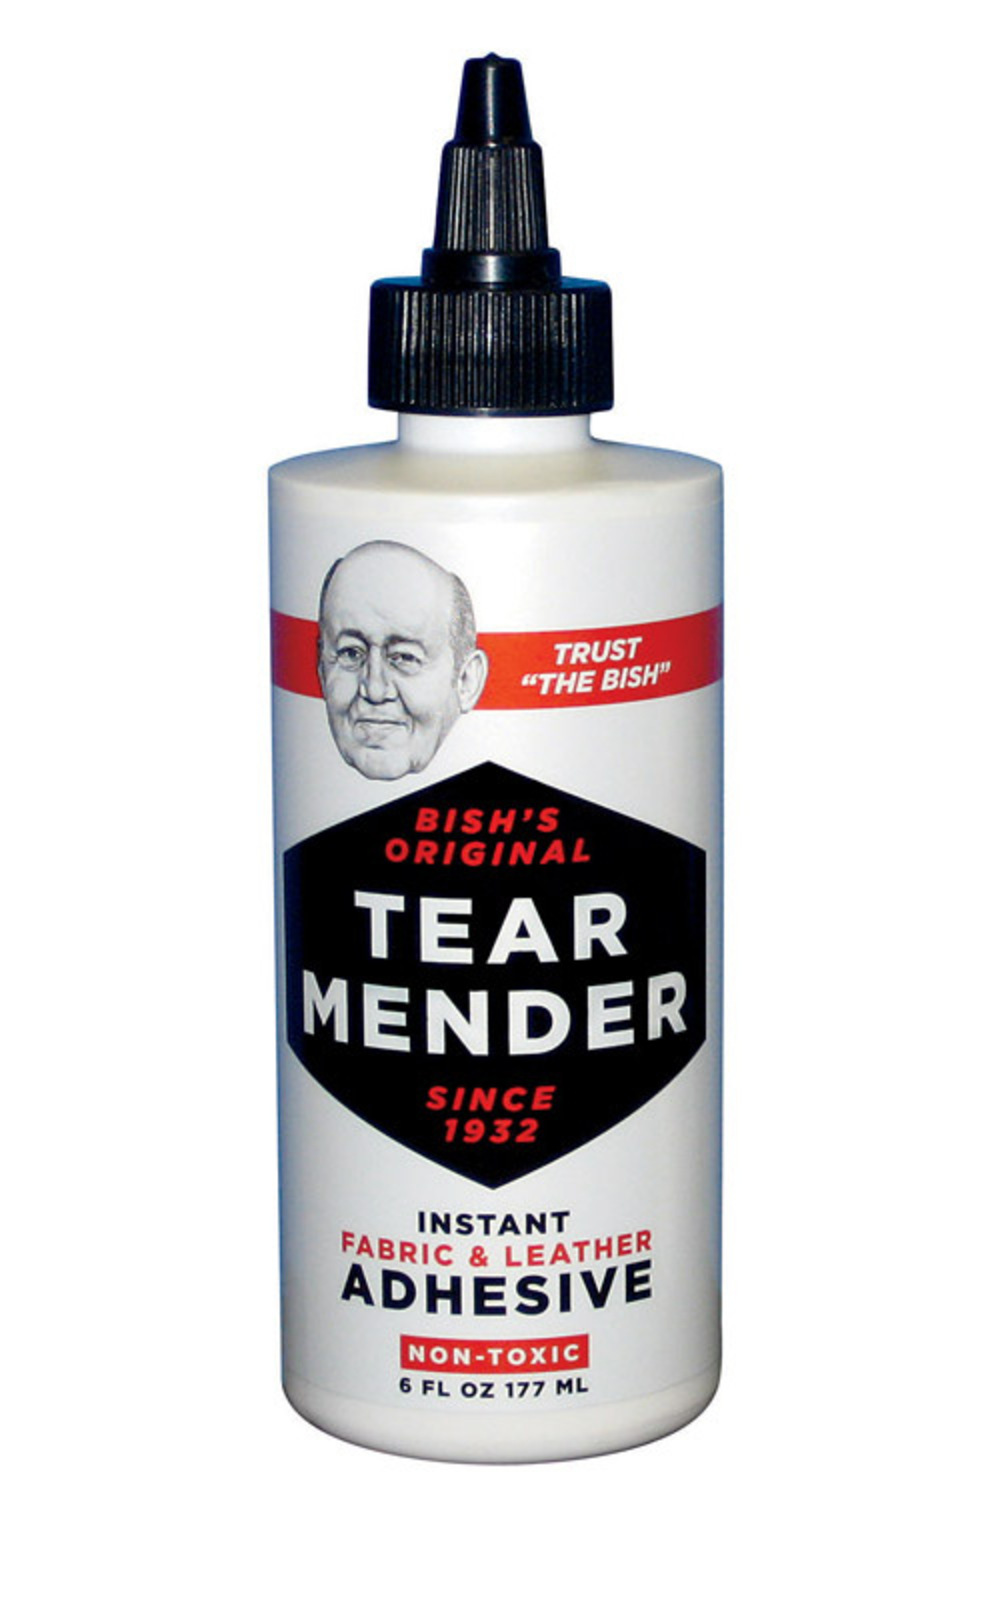 Tear Mender Instant Fabric and Leather Adhesive, 6 oz Bottle, TG-6H - image 2 of 2